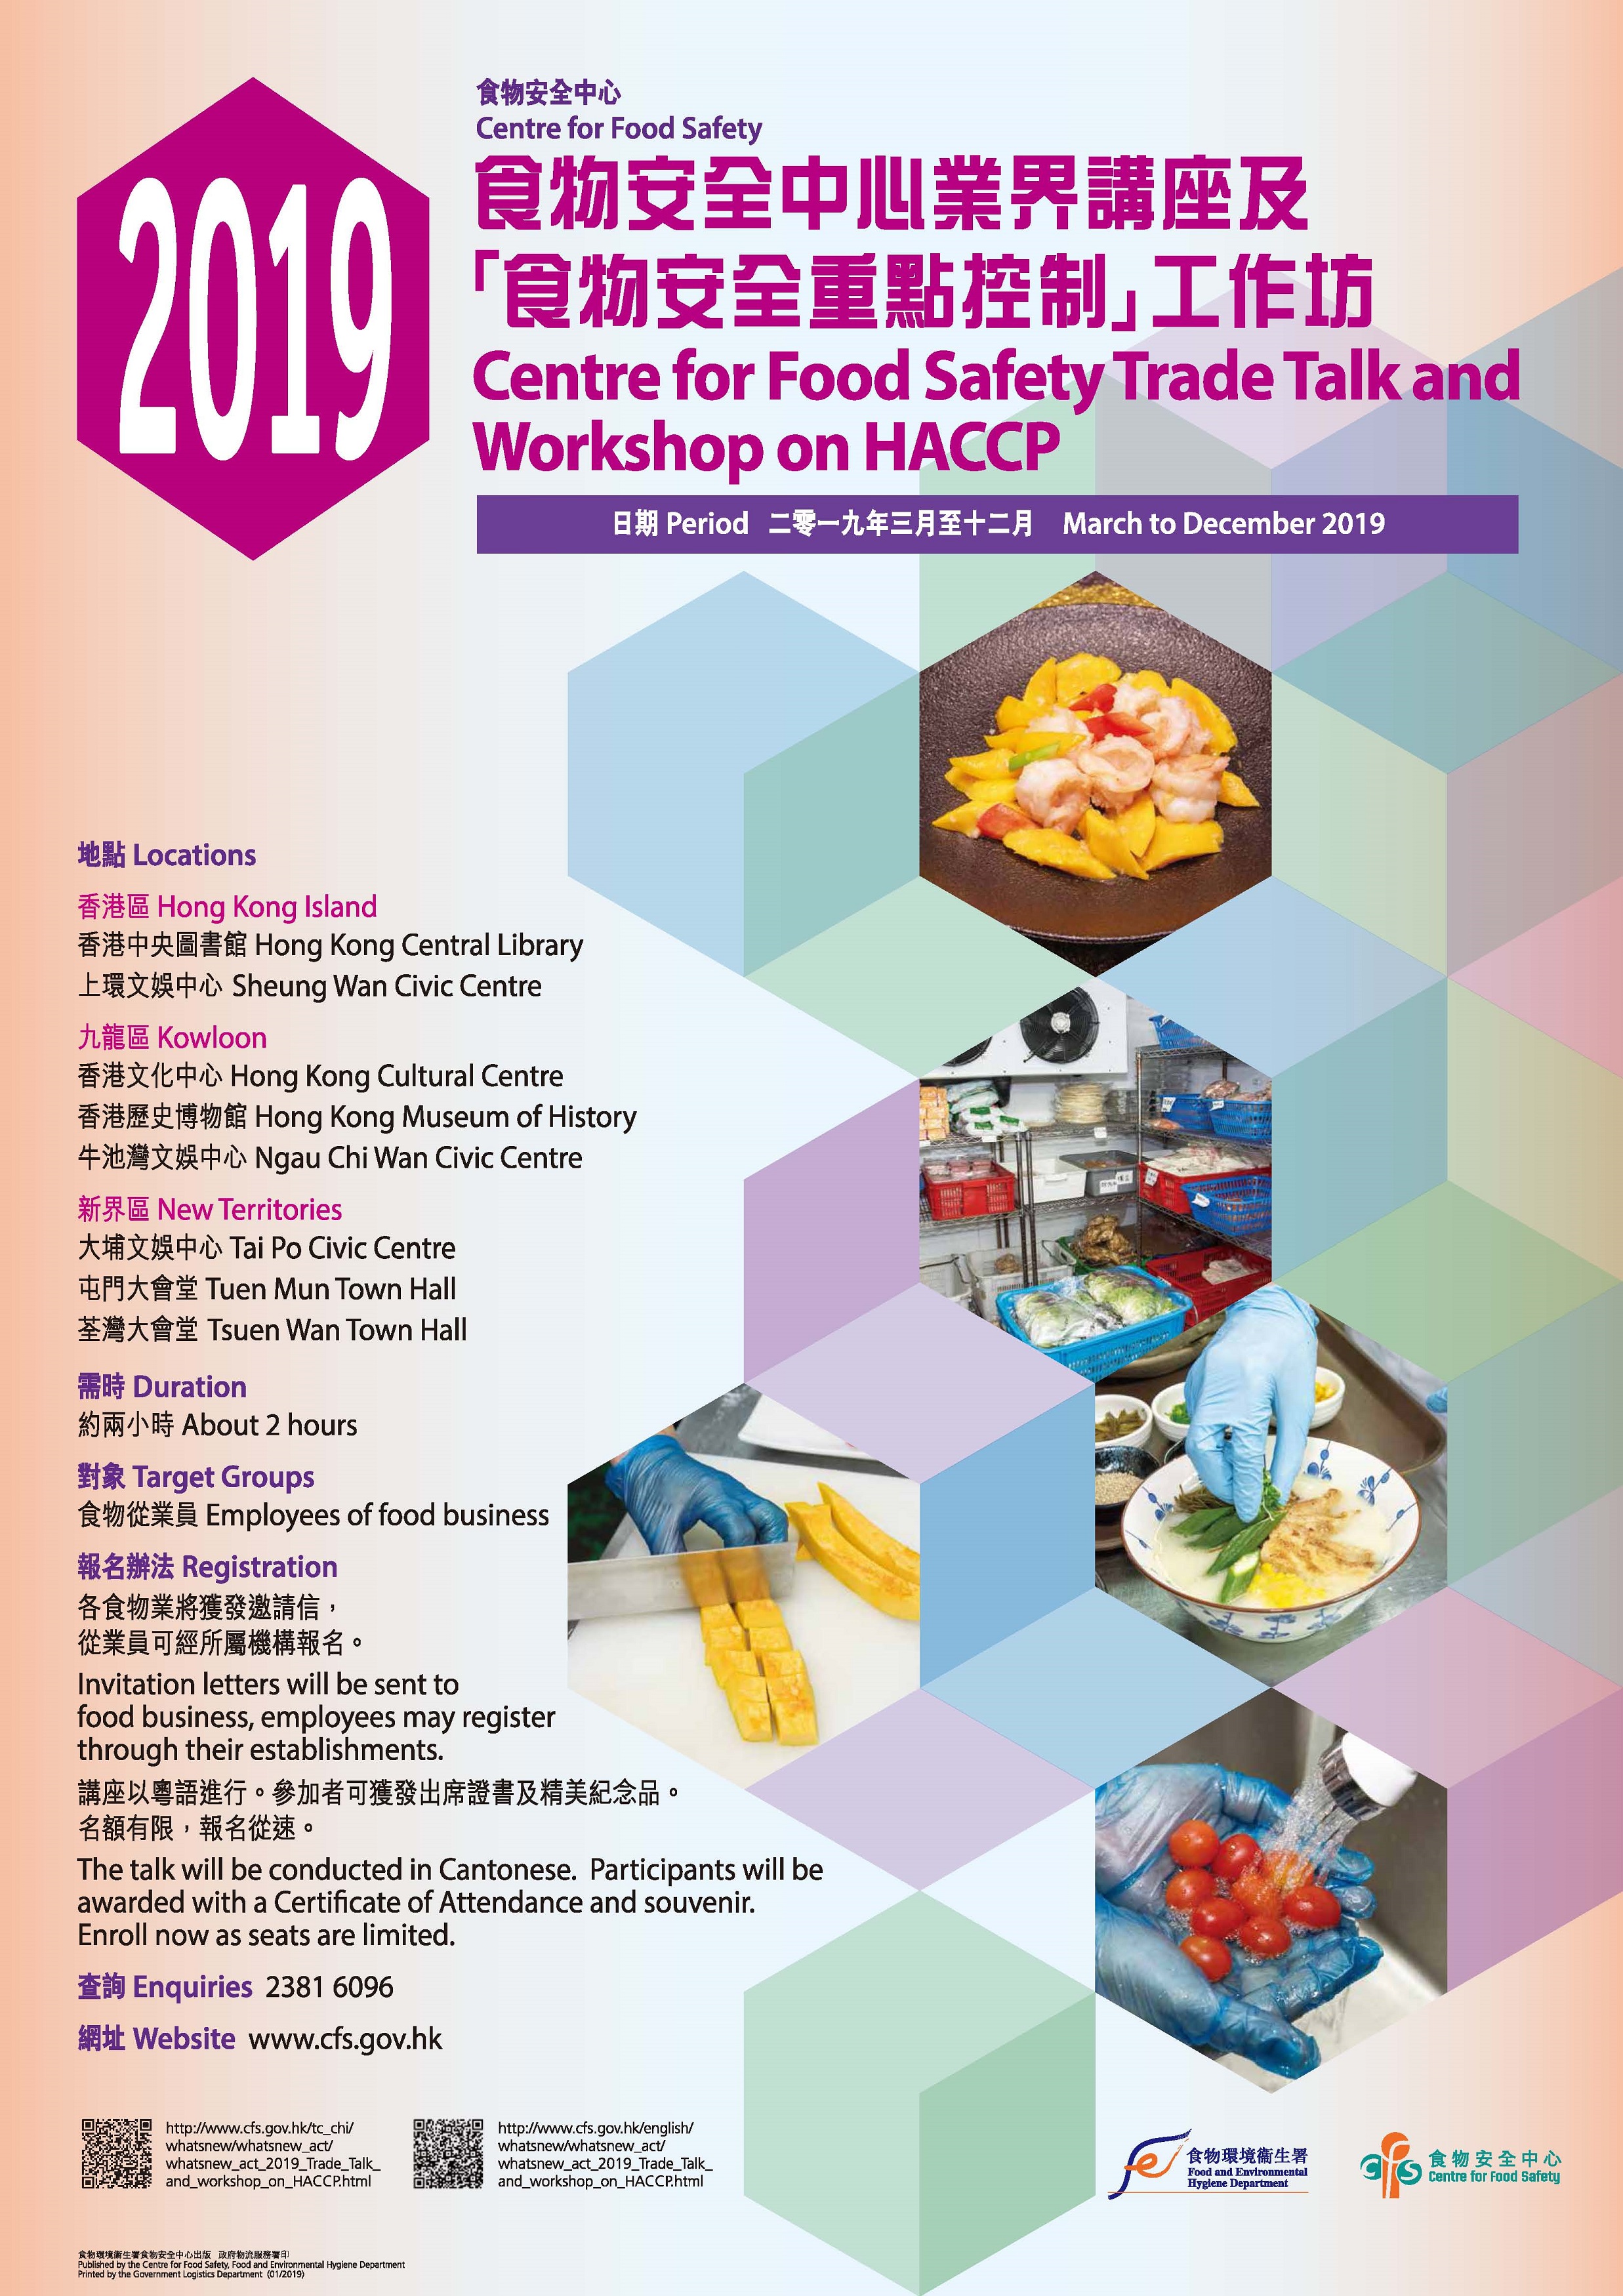 2018 Trade Talk and workshop on HACCP